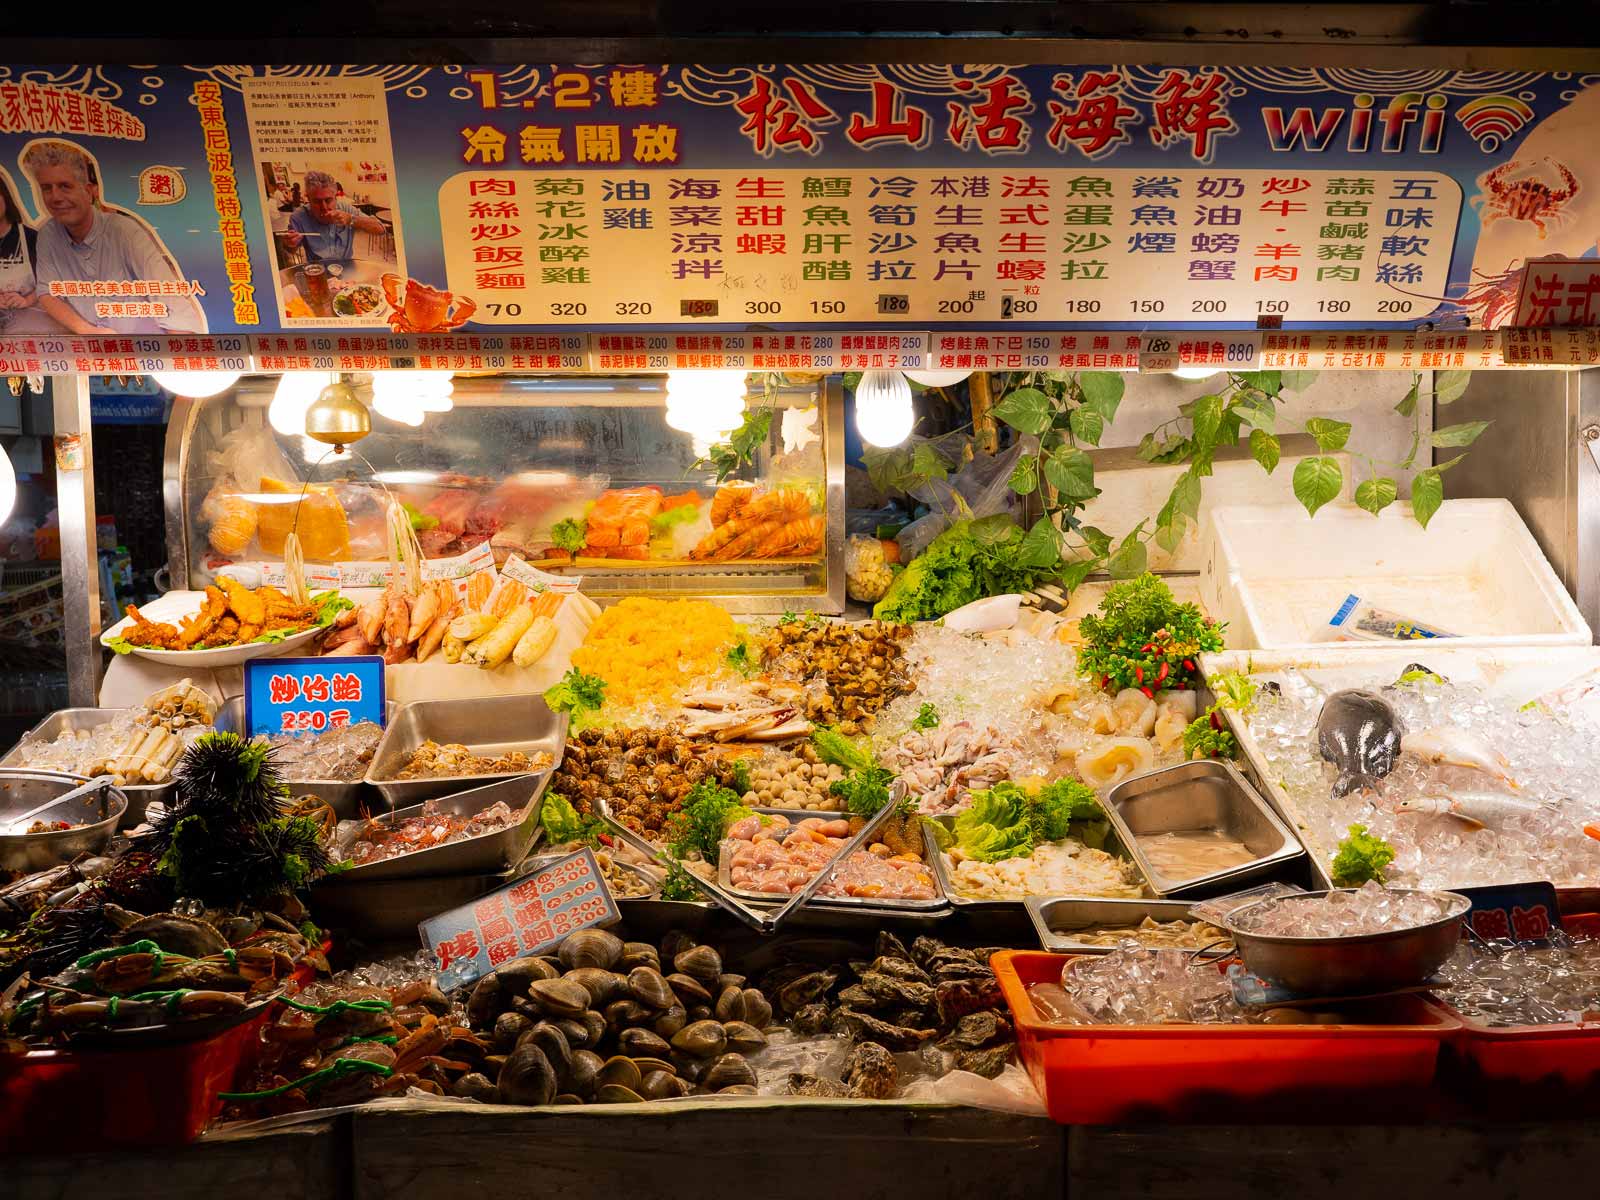 Assorted fresh seafood on display outside of an eatery.